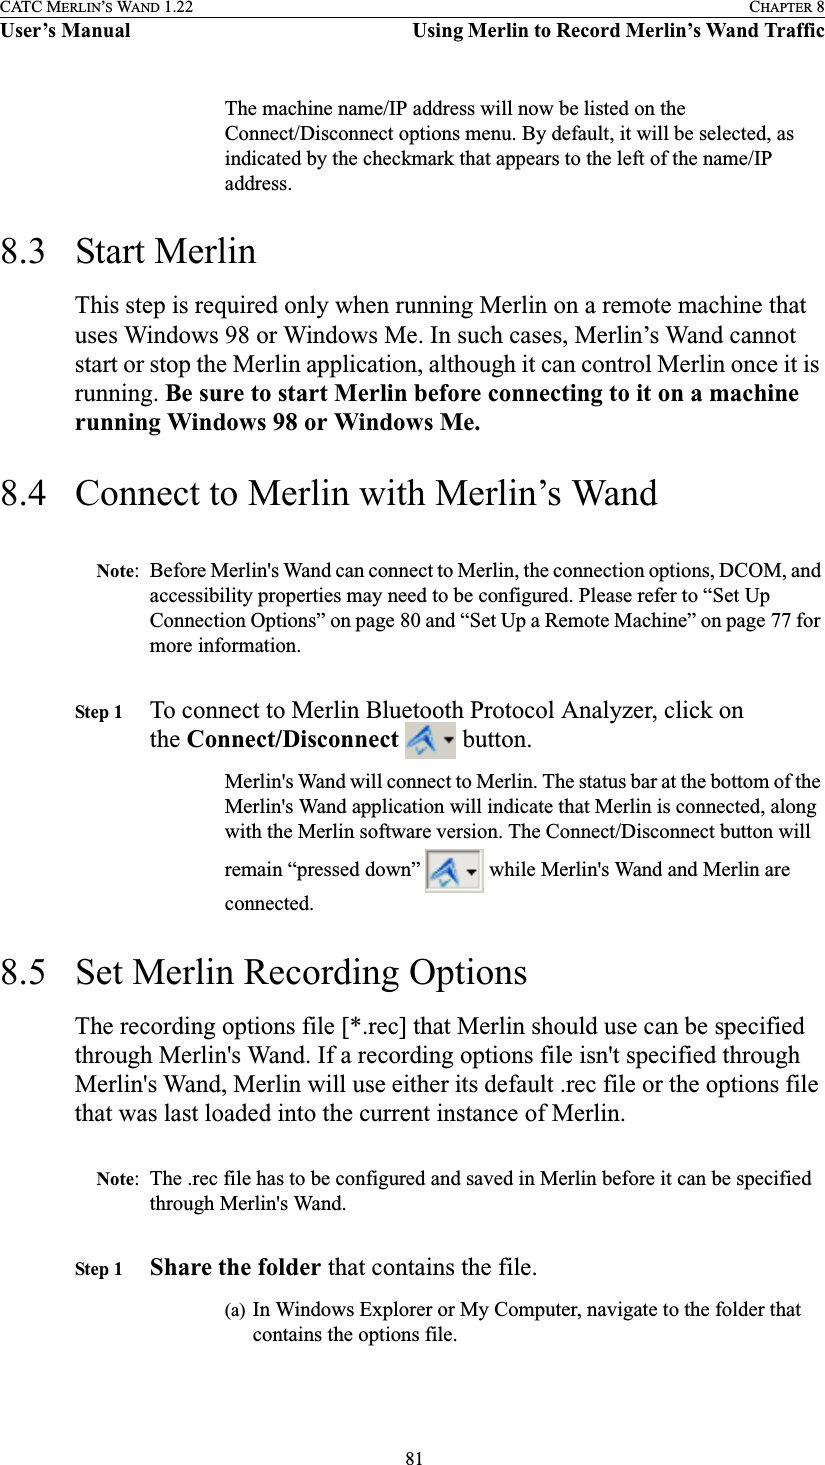  81CATC MERLIN’S WAND 1.22 CHAPTER 8User’s Manual Using Merlin to Record Merlin’s Wand TrafficThe machine name/IP address will now be listed on the Connect/Disconnect options menu. By default, it will be selected, as indicated by the checkmark that appears to the left of the name/IP address.8.3 Start MerlinThis step is required only when running Merlin on a remote machine that uses Windows 98 or Windows Me. In such cases, Merlin’s Wand cannot start or stop the Merlin application, although it can control Merlin once it is running. Be sure to start Merlin before connecting to it on a machine running Windows 98 or Windows Me.8.4 Connect to Merlin with Merlin’s WandNote: Before Merlin&apos;s Wand can connect to Merlin, the connection options, DCOM, and accessibility properties may need to be configured. Please refer to “Set Up Connection Options” on page 80 and “Set Up a Remote Machine” on page 77 for more information.Step 1 To connect to Merlin Bluetooth Protocol Analyzer, click on the Connect/Disconnect   button.Merlin&apos;s Wand will connect to Merlin. The status bar at the bottom of the Merlin&apos;s Wand application will indicate that Merlin is connected, along with the Merlin software version. The Connect/Disconnect button will remain “pressed down”   while Merlin&apos;s Wand and Merlin are connected.8.5 Set Merlin Recording OptionsThe recording options file [*.rec] that Merlin should use can be specified through Merlin&apos;s Wand. If a recording options file isn&apos;t specified through Merlin&apos;s Wand, Merlin will use either its default .rec file or the options file that was last loaded into the current instance of Merlin.Note: The .rec file has to be configured and saved in Merlin before it can be specified through Merlin&apos;s Wand. Step 1 Share the folder that contains the file.(a) In Windows Explorer or My Computer, navigate to the folder that contains the options file.